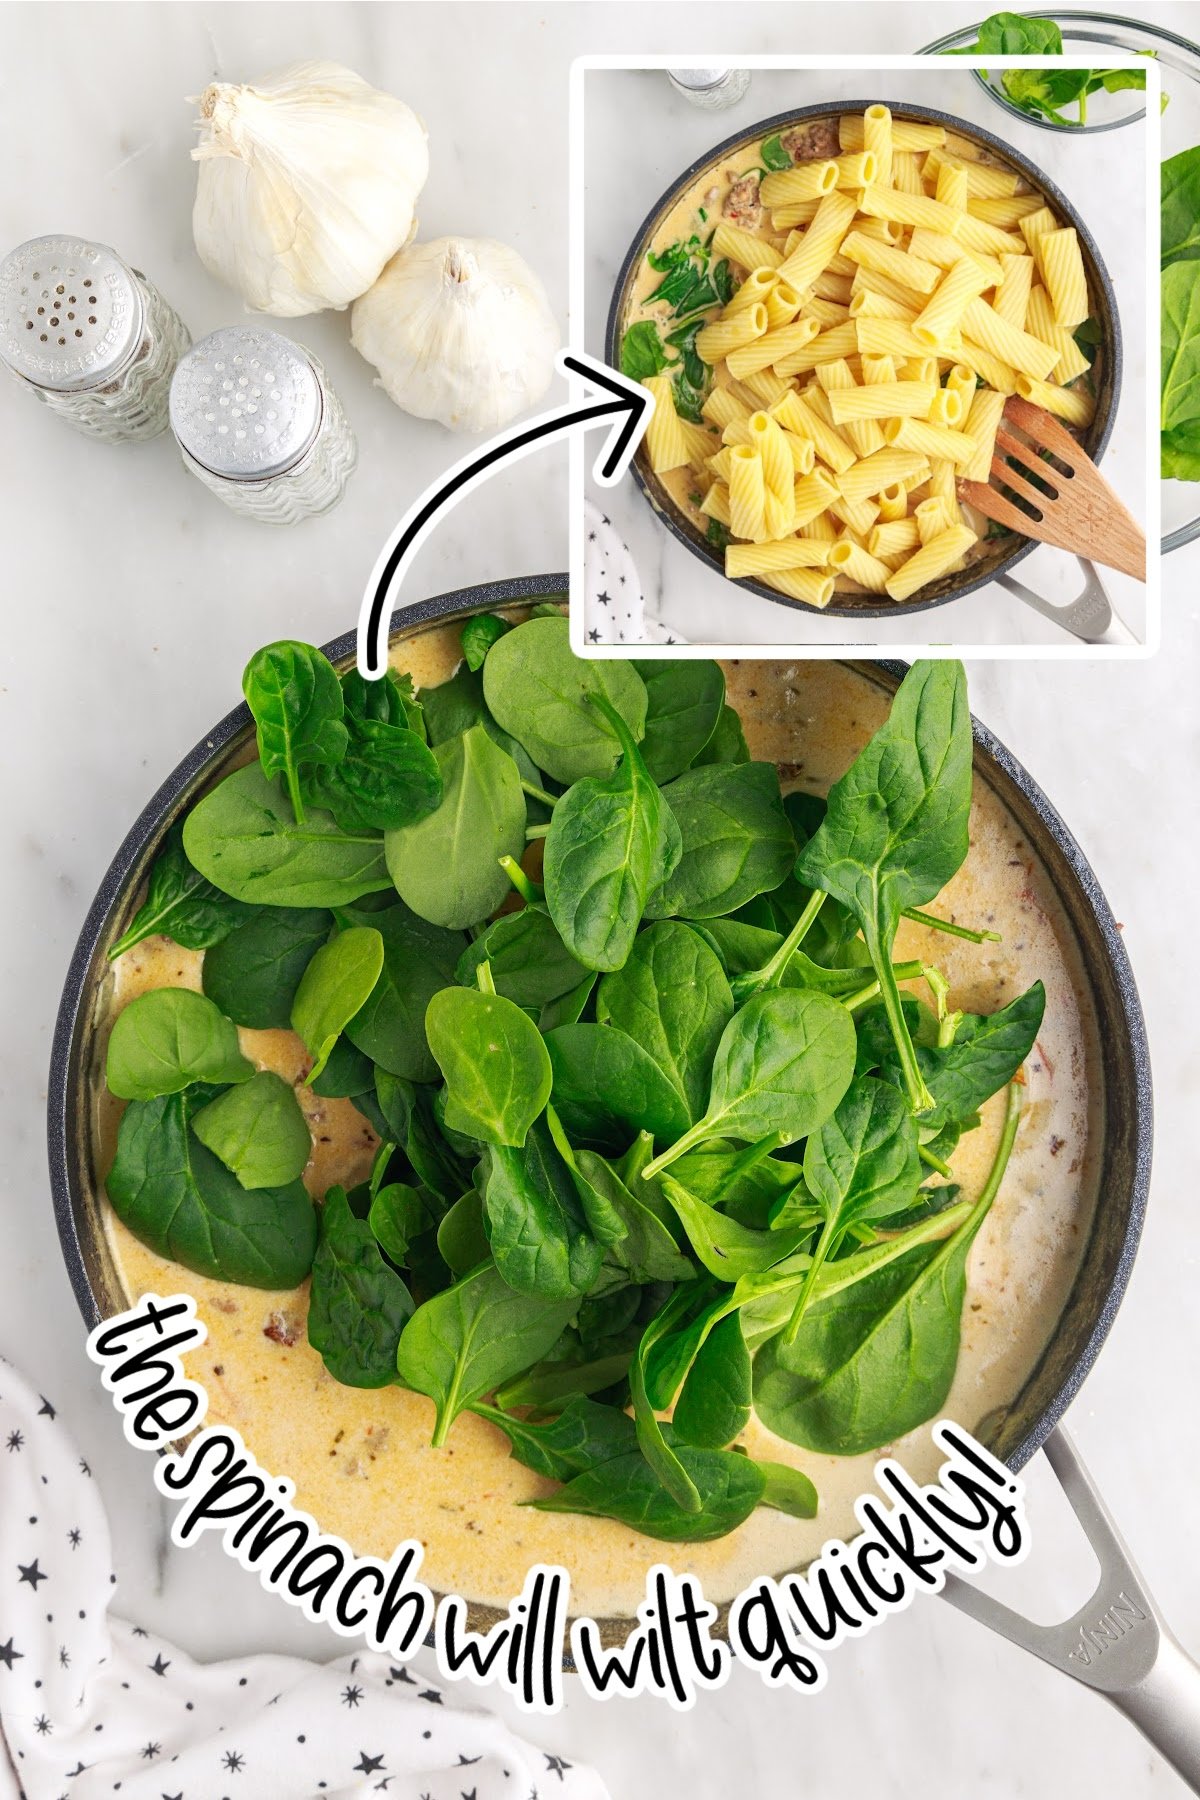 Adding spinach and pasta to the skillet.